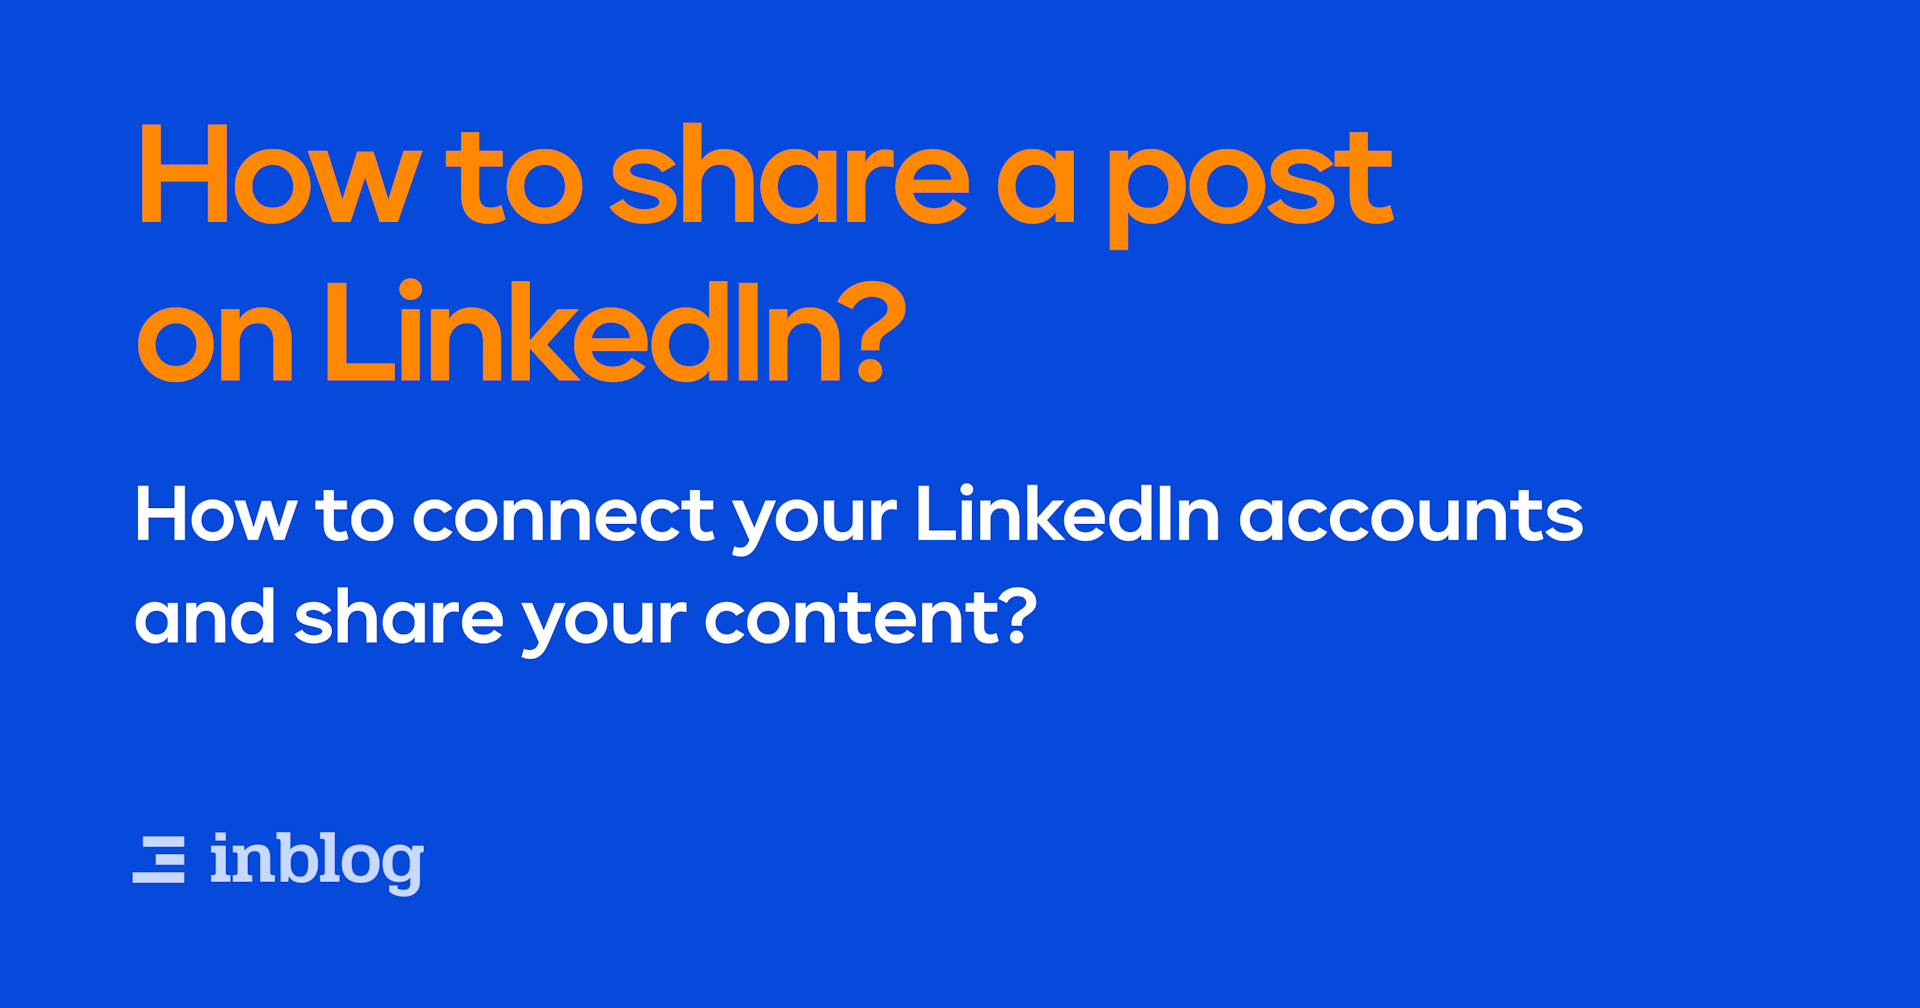 How to share a post on LinkedIn?